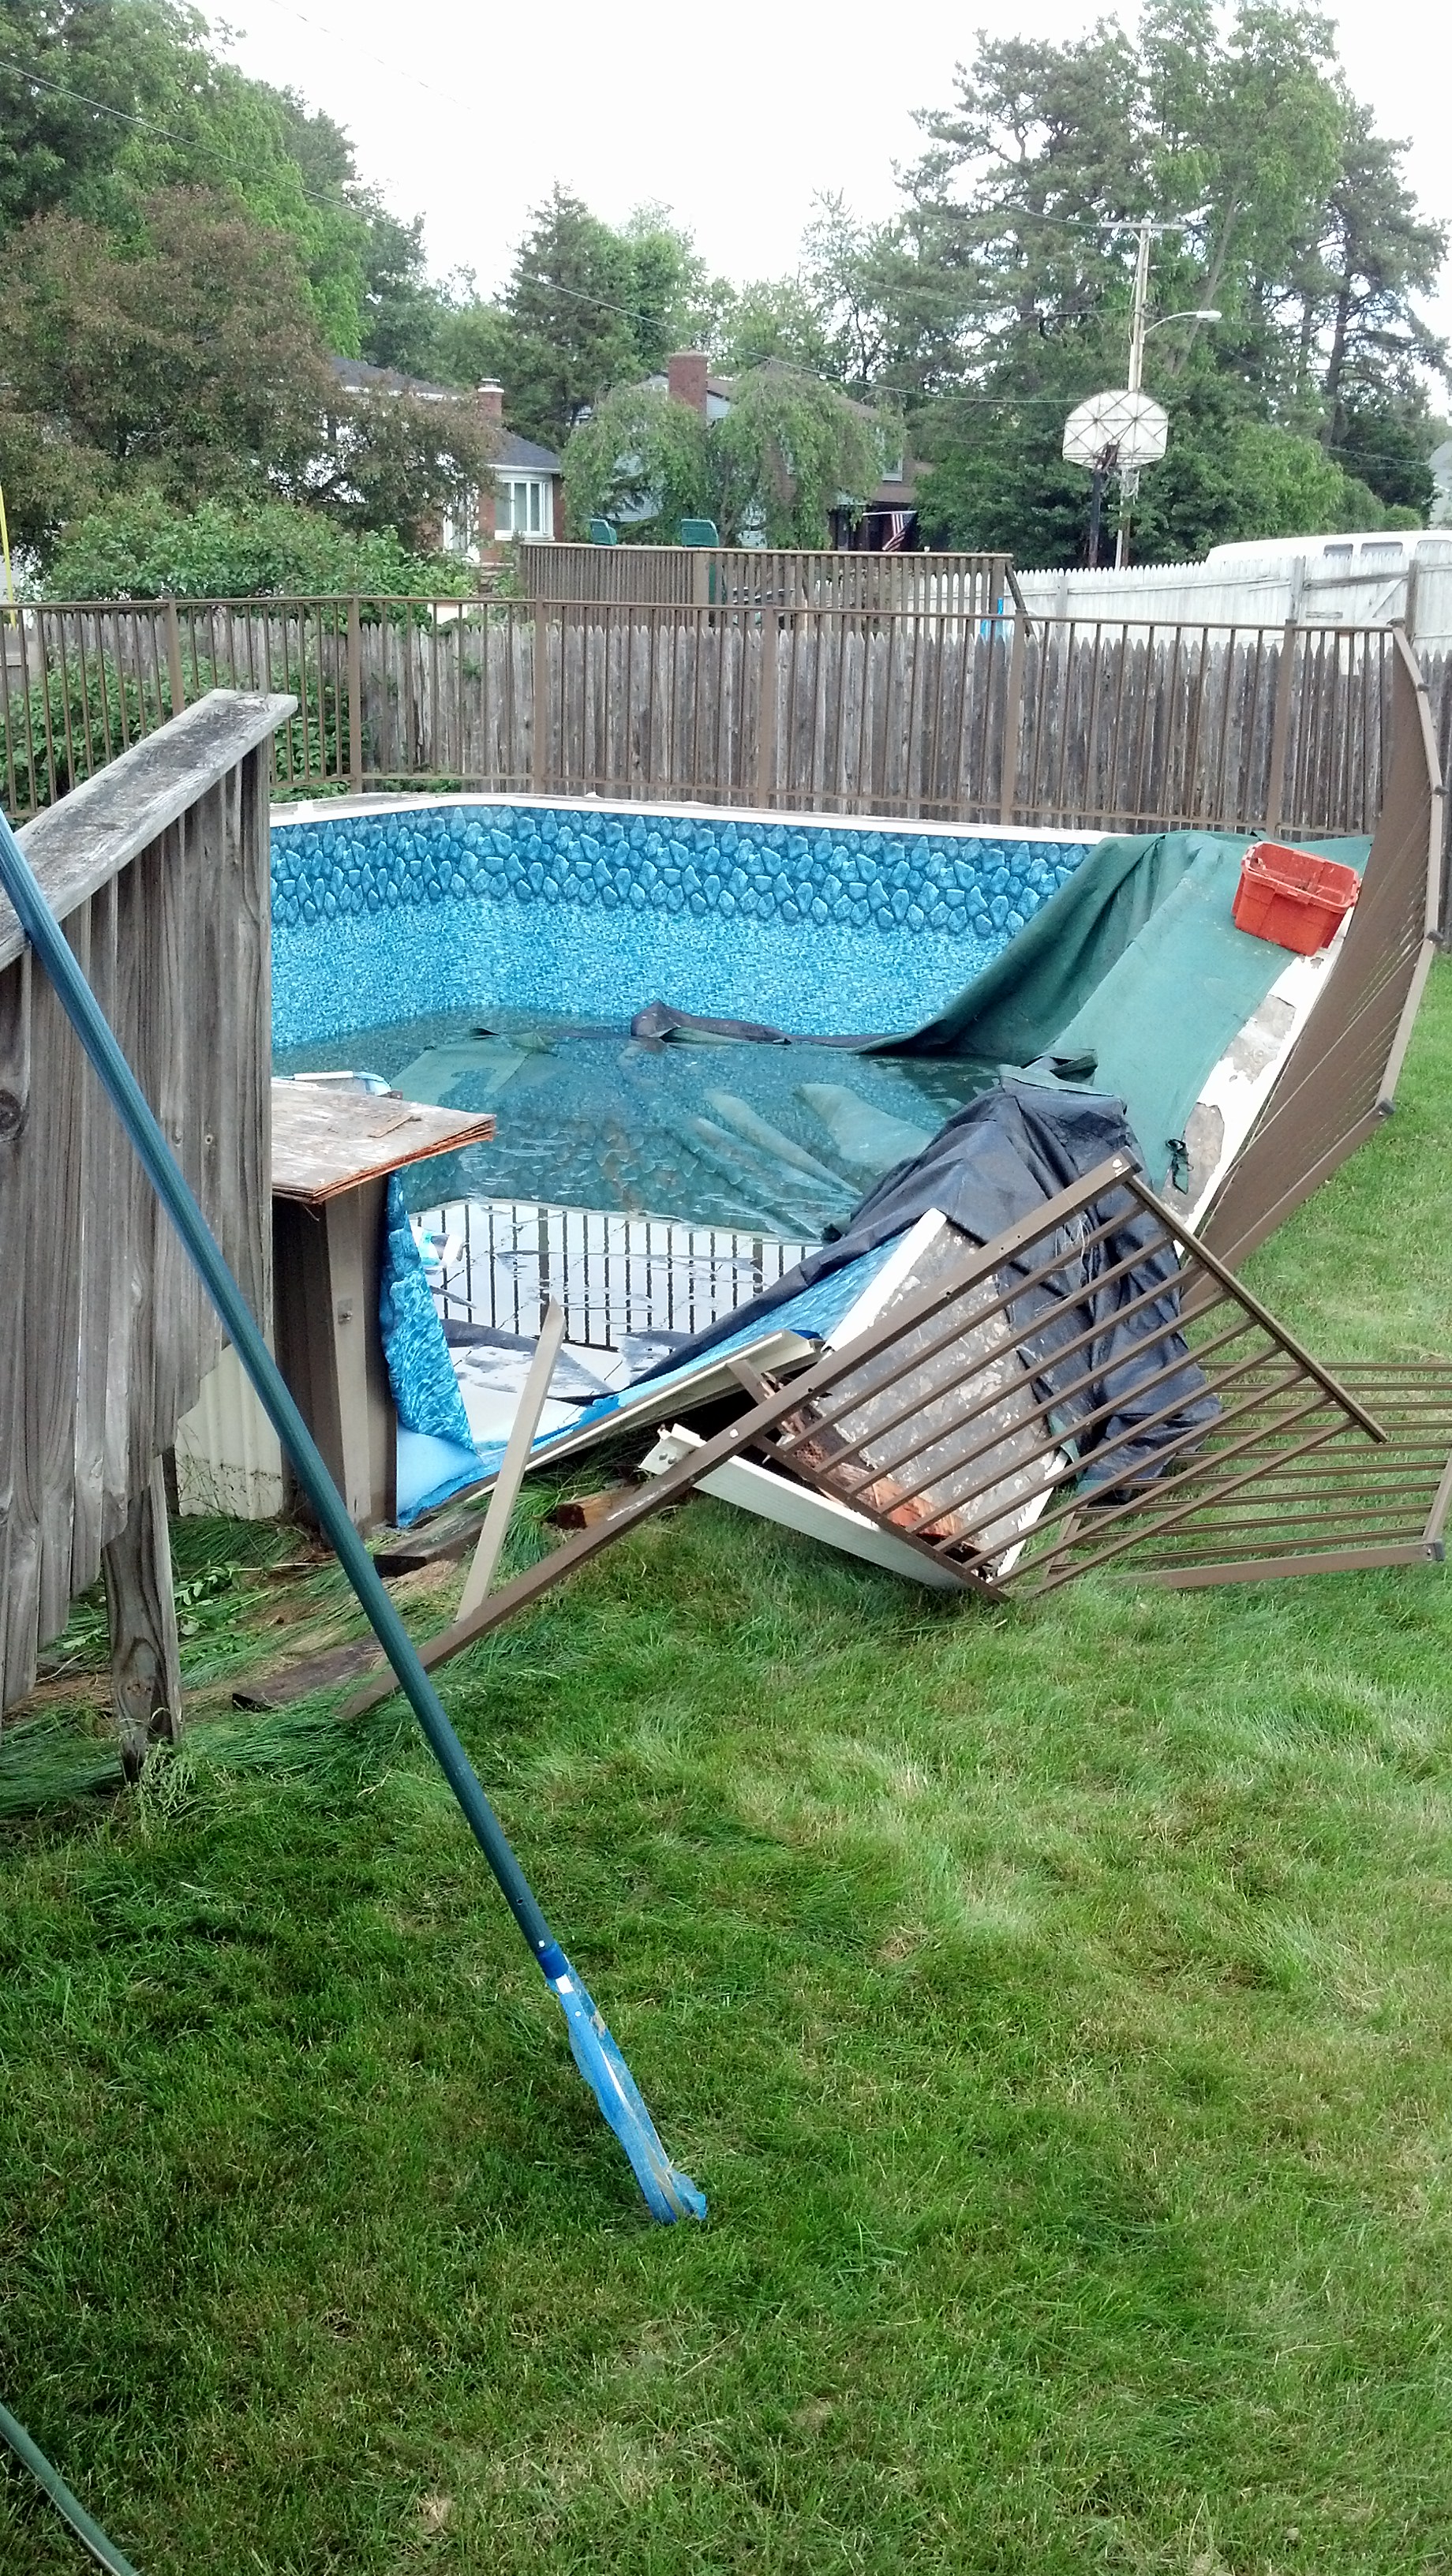 This "Was" a Pool